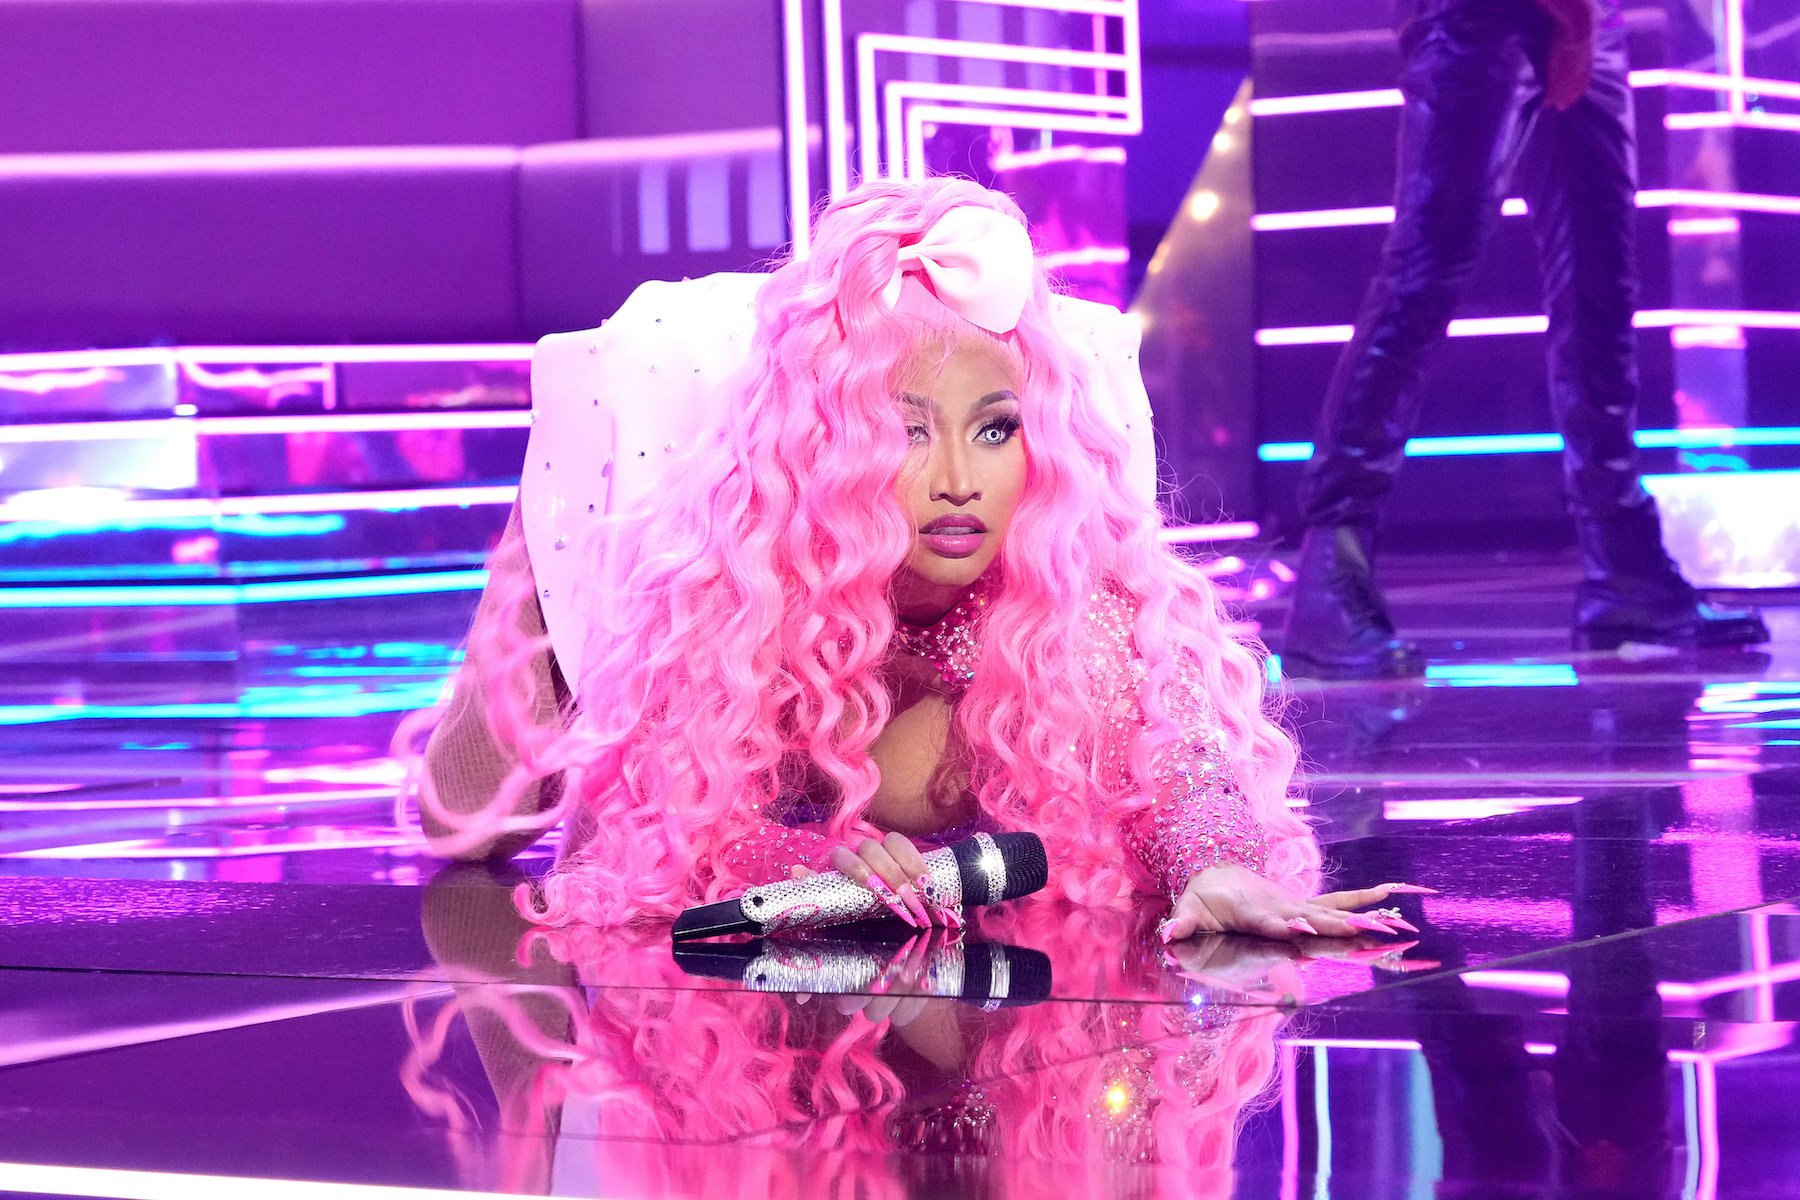 Nicki Minaj, whose fourth album 'Queen' was released in 2018, performing at the 2022 MTV VMAs